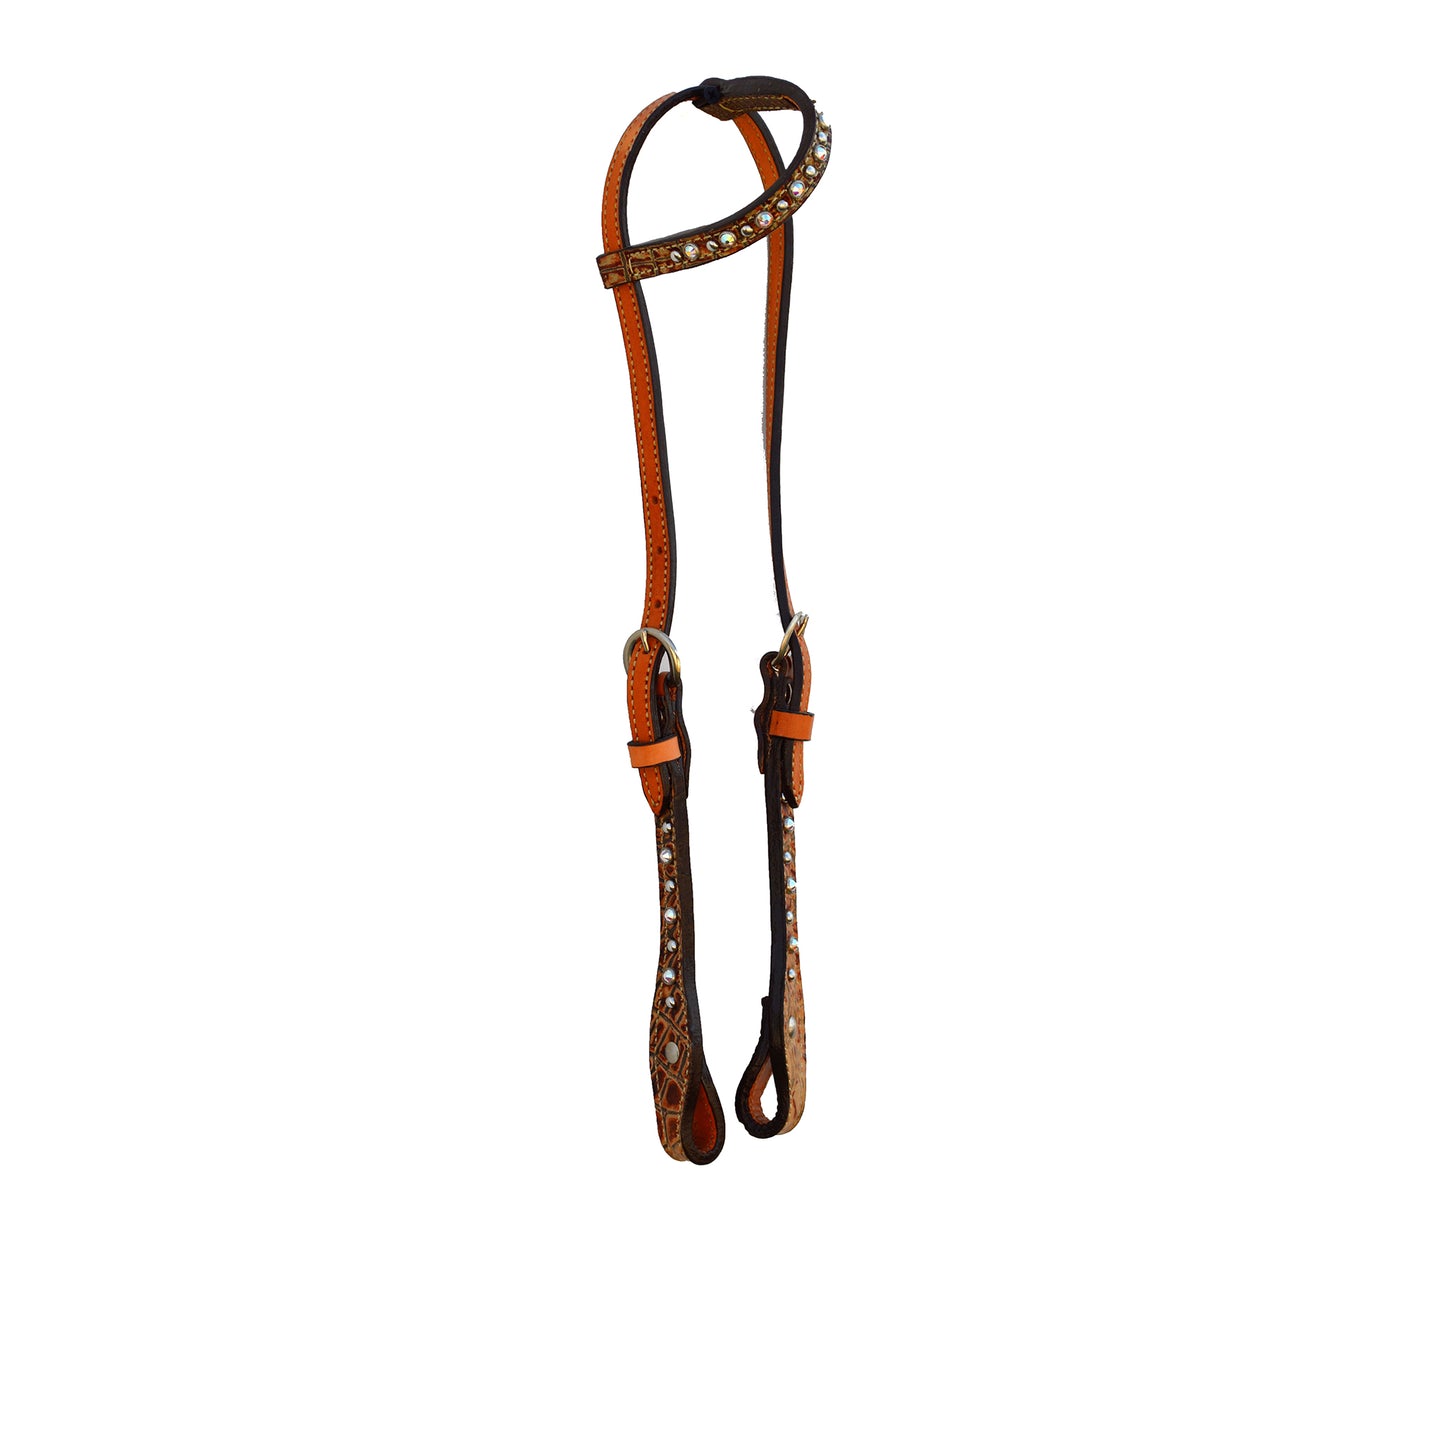 2071-JGB 5/8" flat one ear headstall golden leather brown gator overlay with crystals and spots